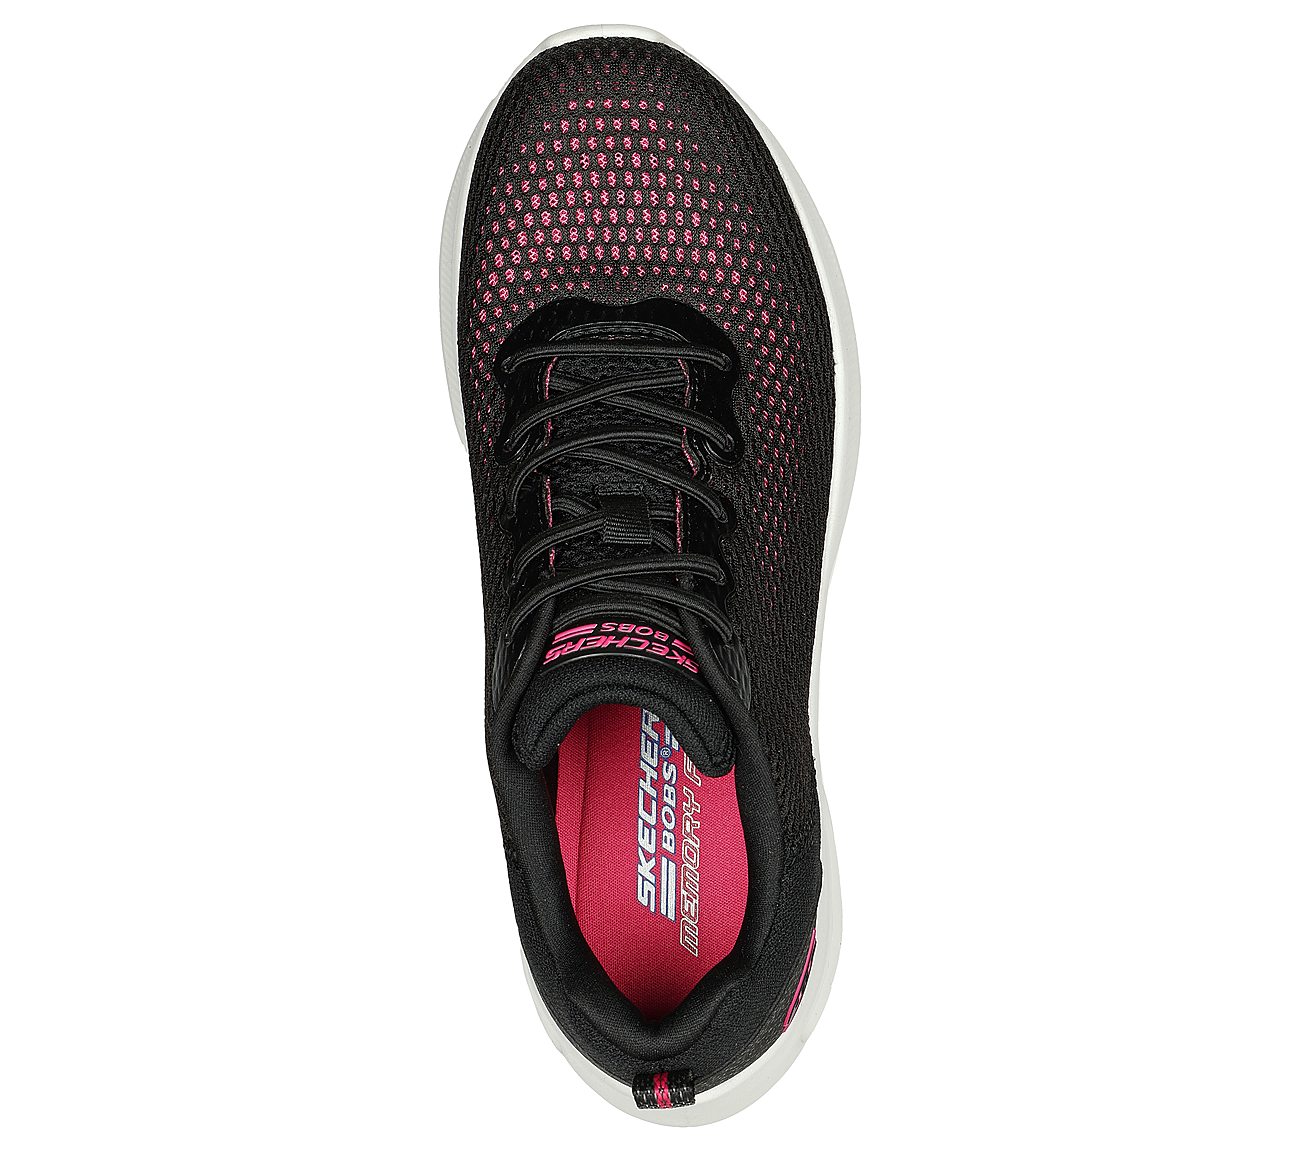 BOBS UNITY - HINT OF COLOR, BLACK/HOT PINK Footwear Top View